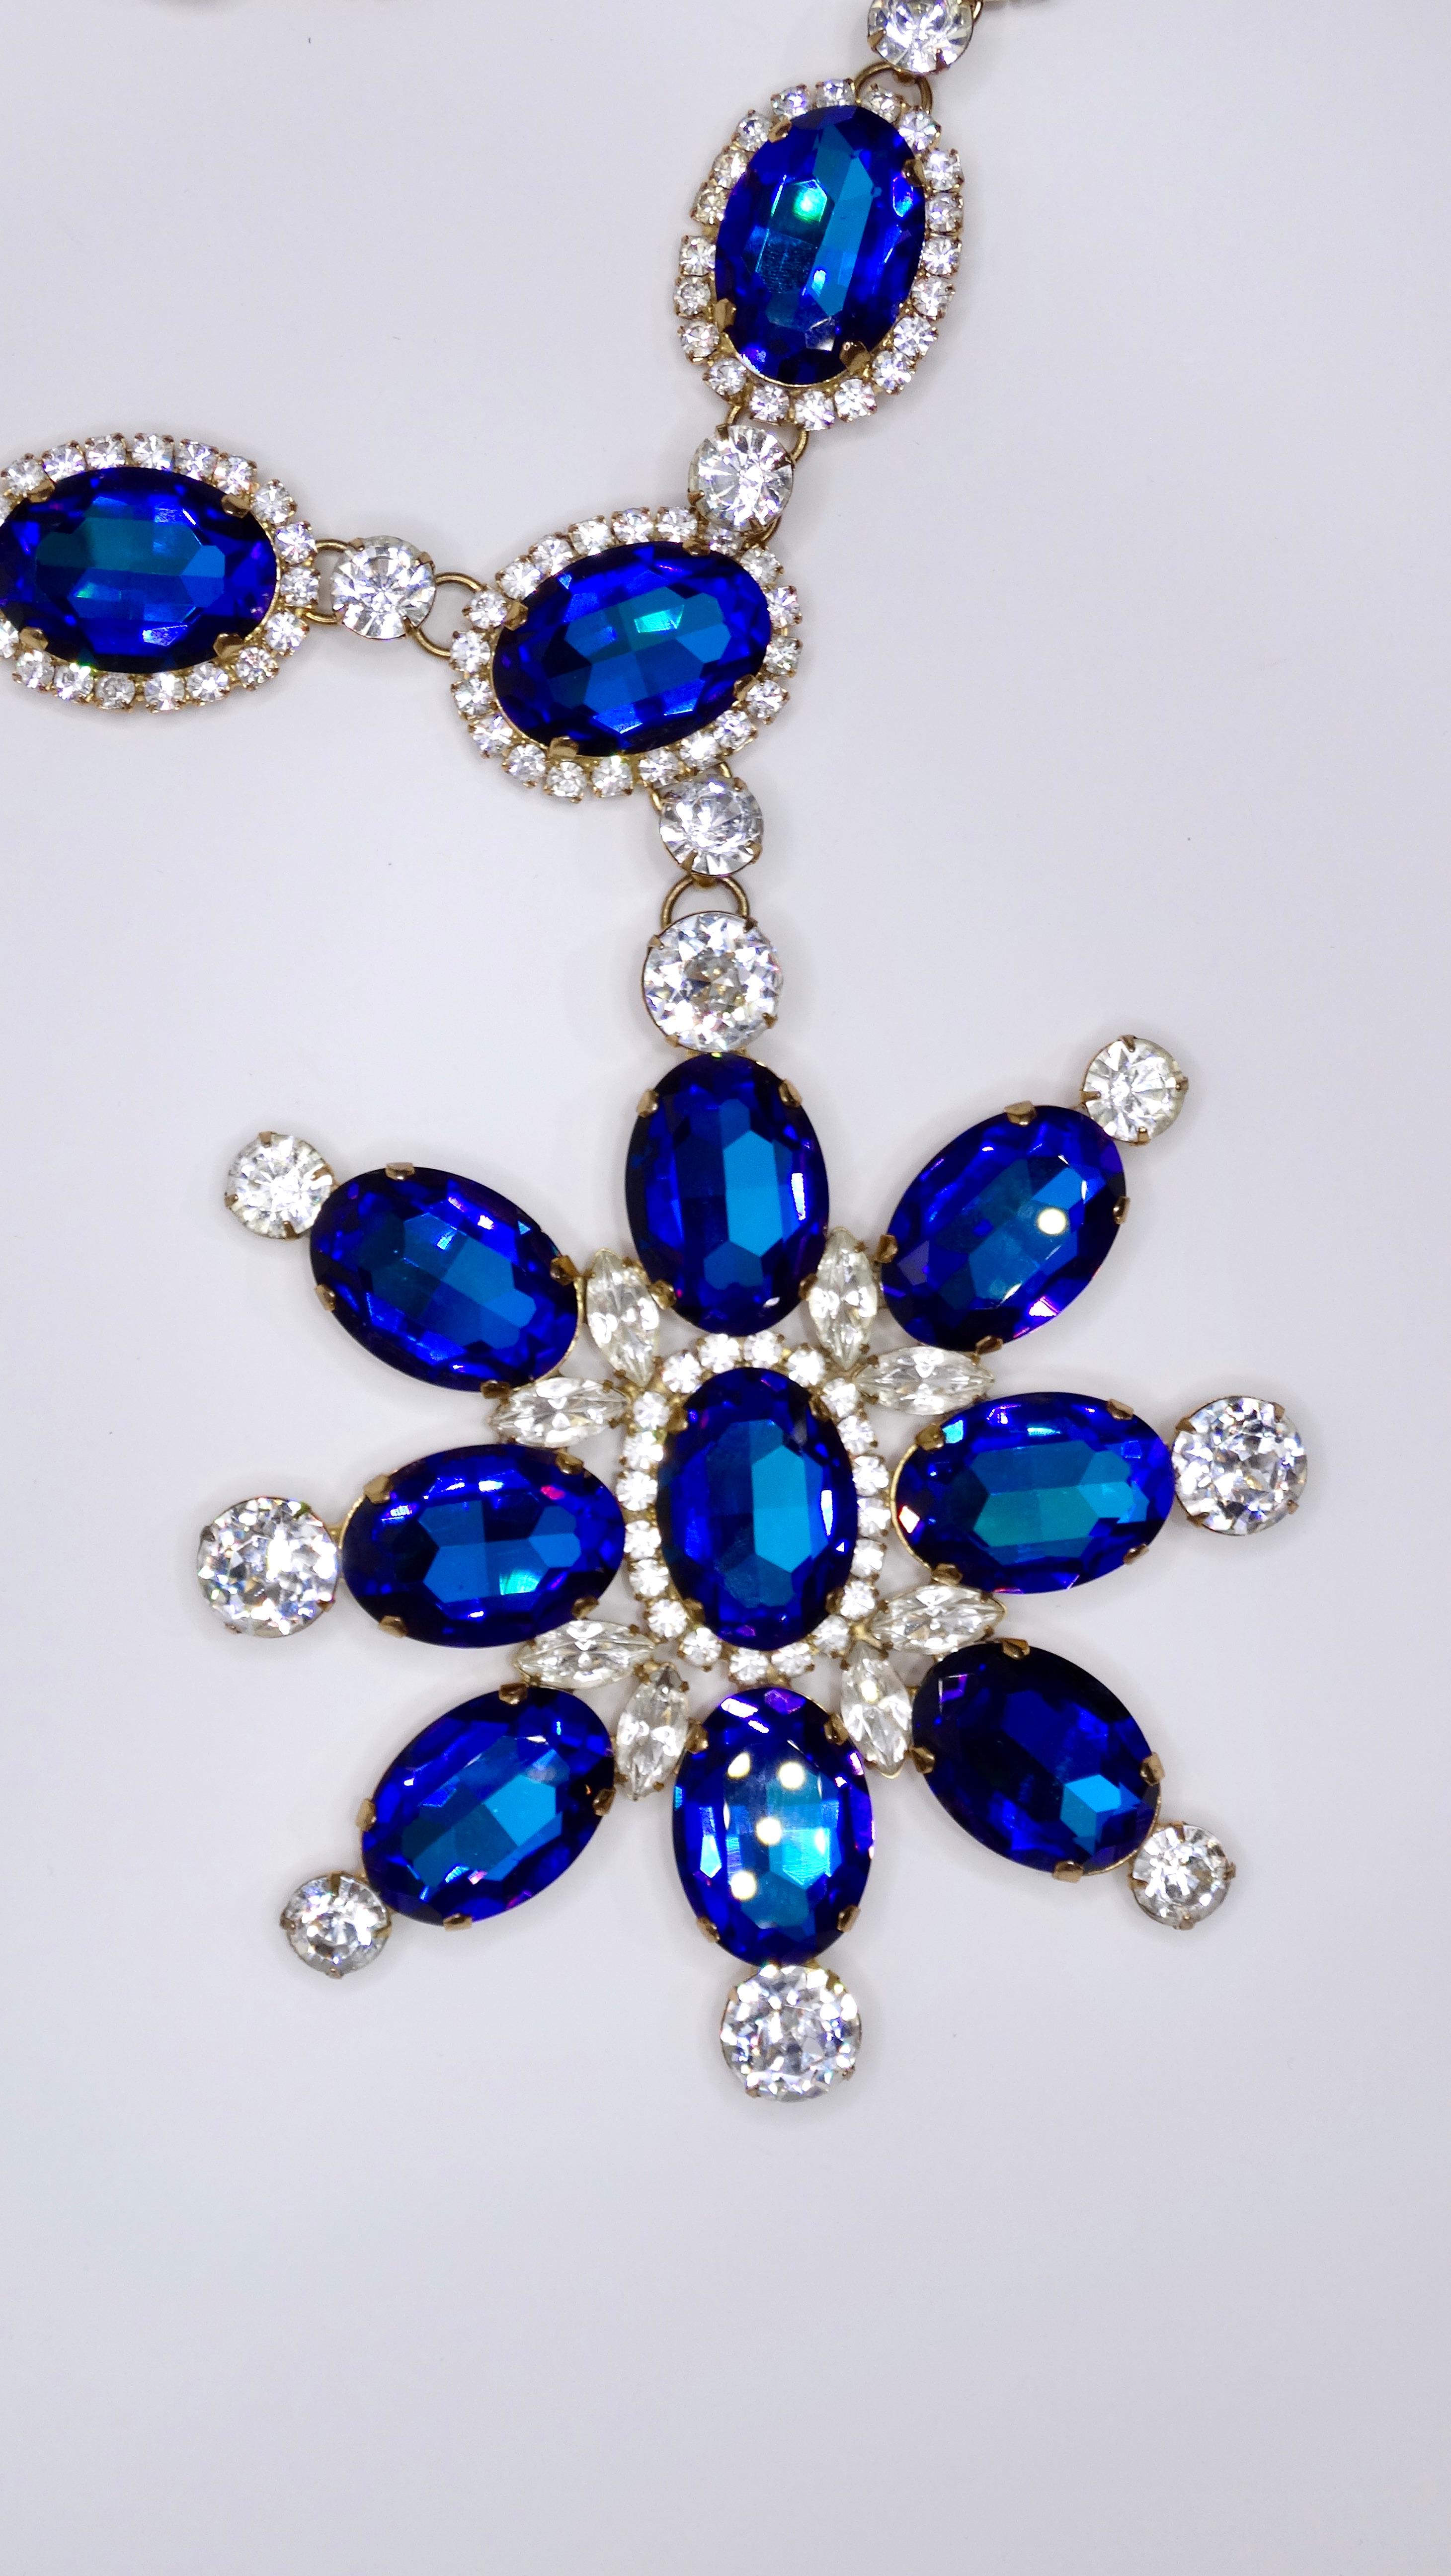 Kenneth Jay Lane 1960s Jeweled Statement Necklace For Sale 1